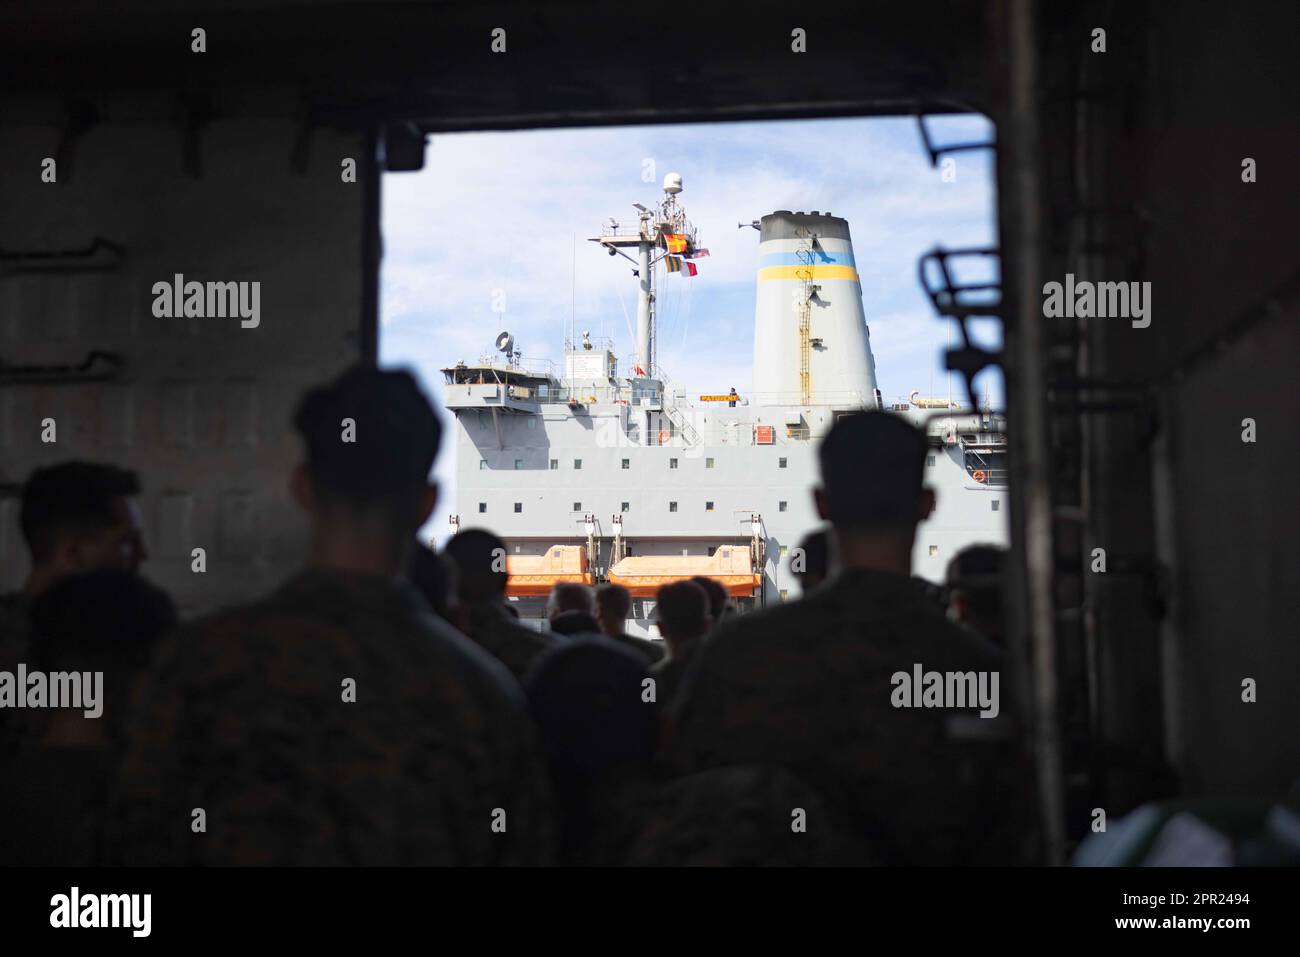 U.S. Marines and Sailors with the 26th Marine Expeditionary Unit (MEU) and the USS Bataan (LHD 5) prepare for a Resupply At-Sea (RAS) during Amphibious Ready Group/MEU Exercise, Atlantic Ocean, April 22, 2023. The RAS was supported by the USNS Patuxent (T-AO-201), transferring fuel, munitions and supplies to the USS Bataan (LHD 5) while under way. The 26th Marine Expeditionary Unit is underway with the Bataan ARG as part of it’s Pre-deployment Training Program. (U.S. Marine Corps photo by Cpl. Kyle Jia) Stock Photo